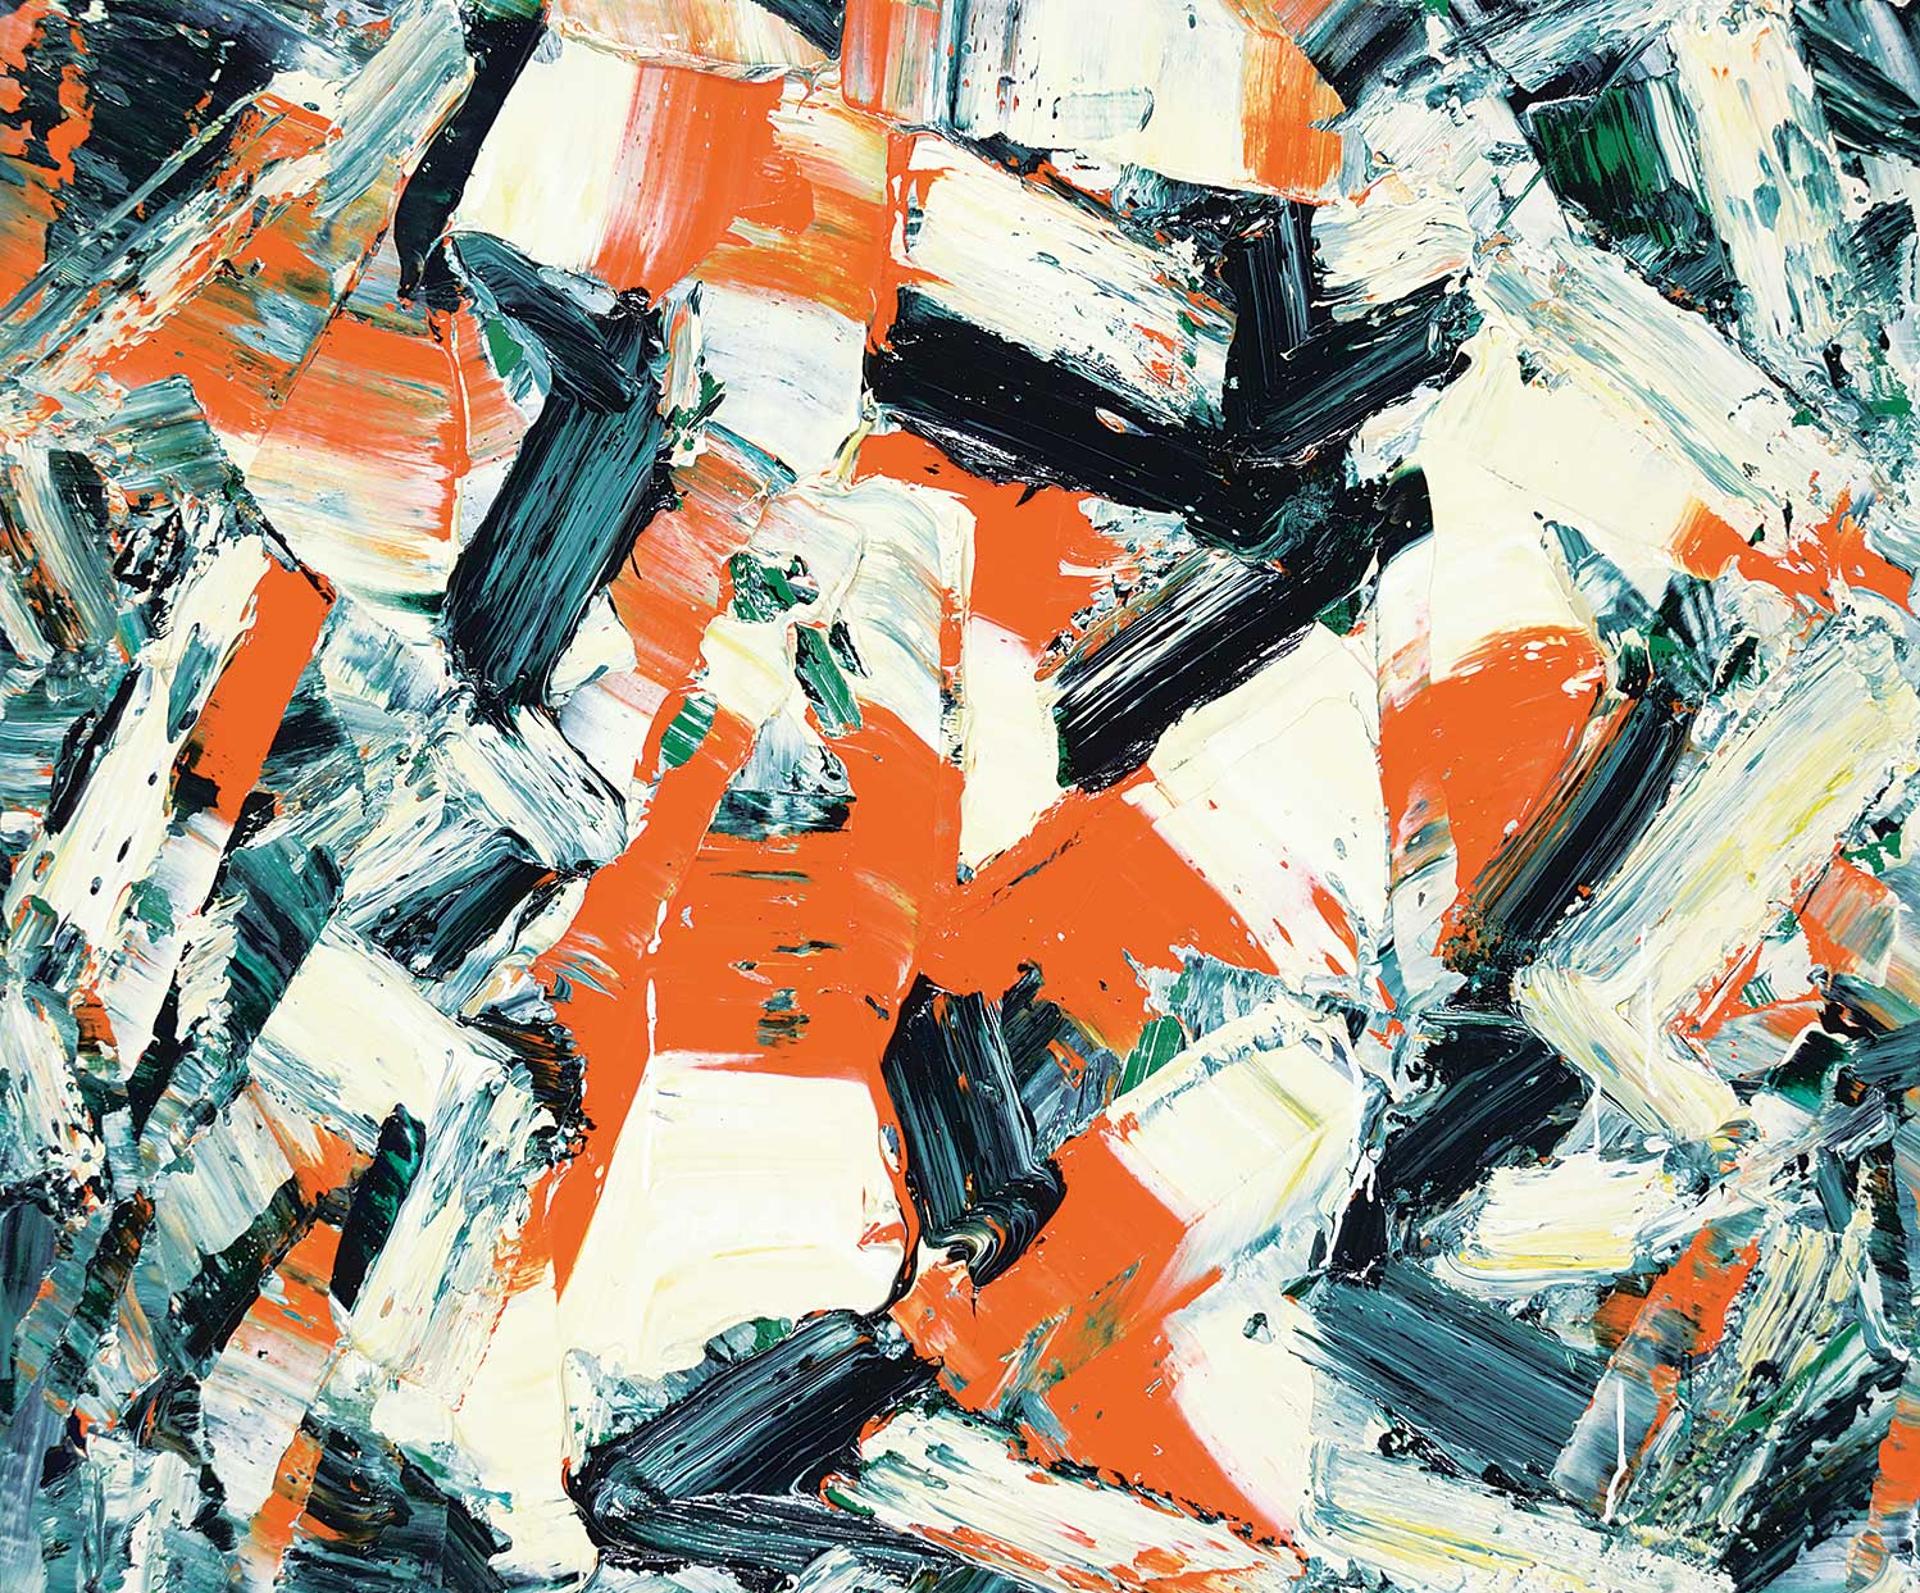 Chris S. Flodberg - Fluctuating Space, Orange, Black and White